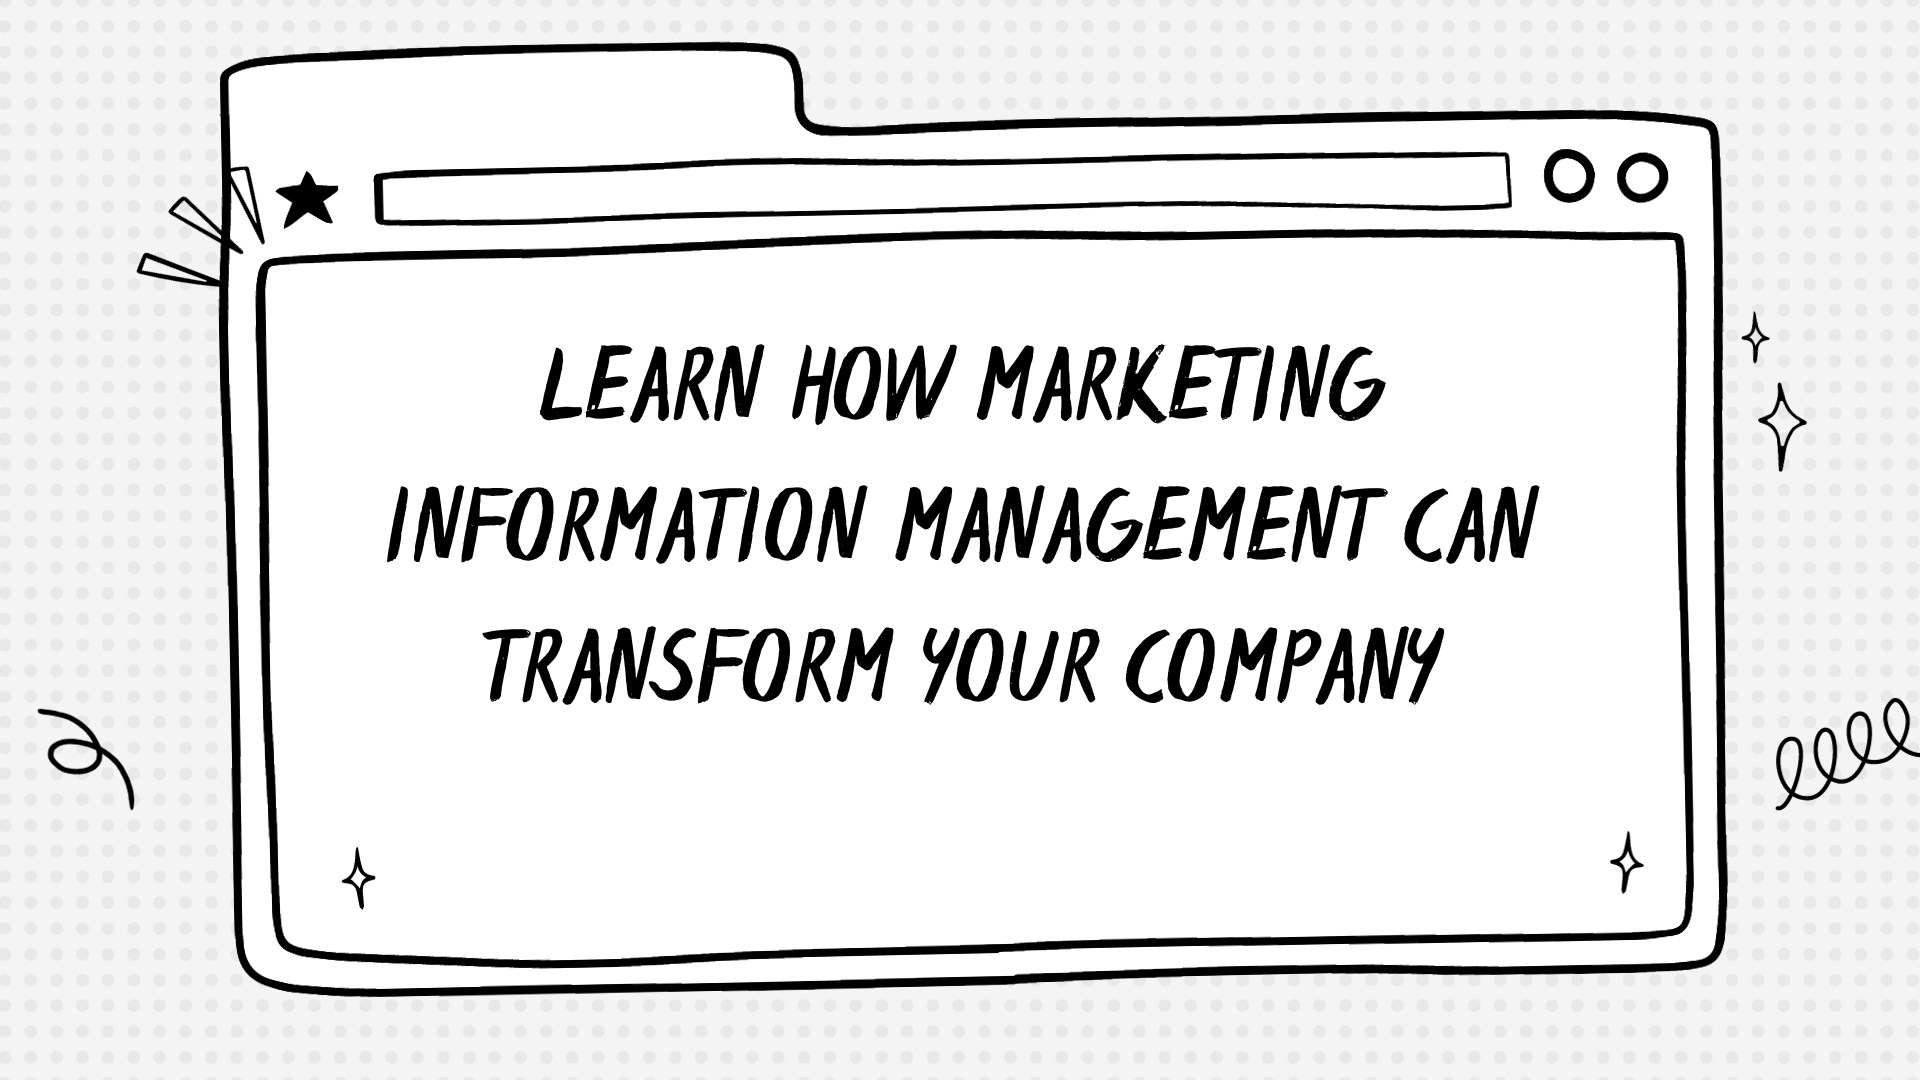 Marketing Information Management Can Transform Your Company